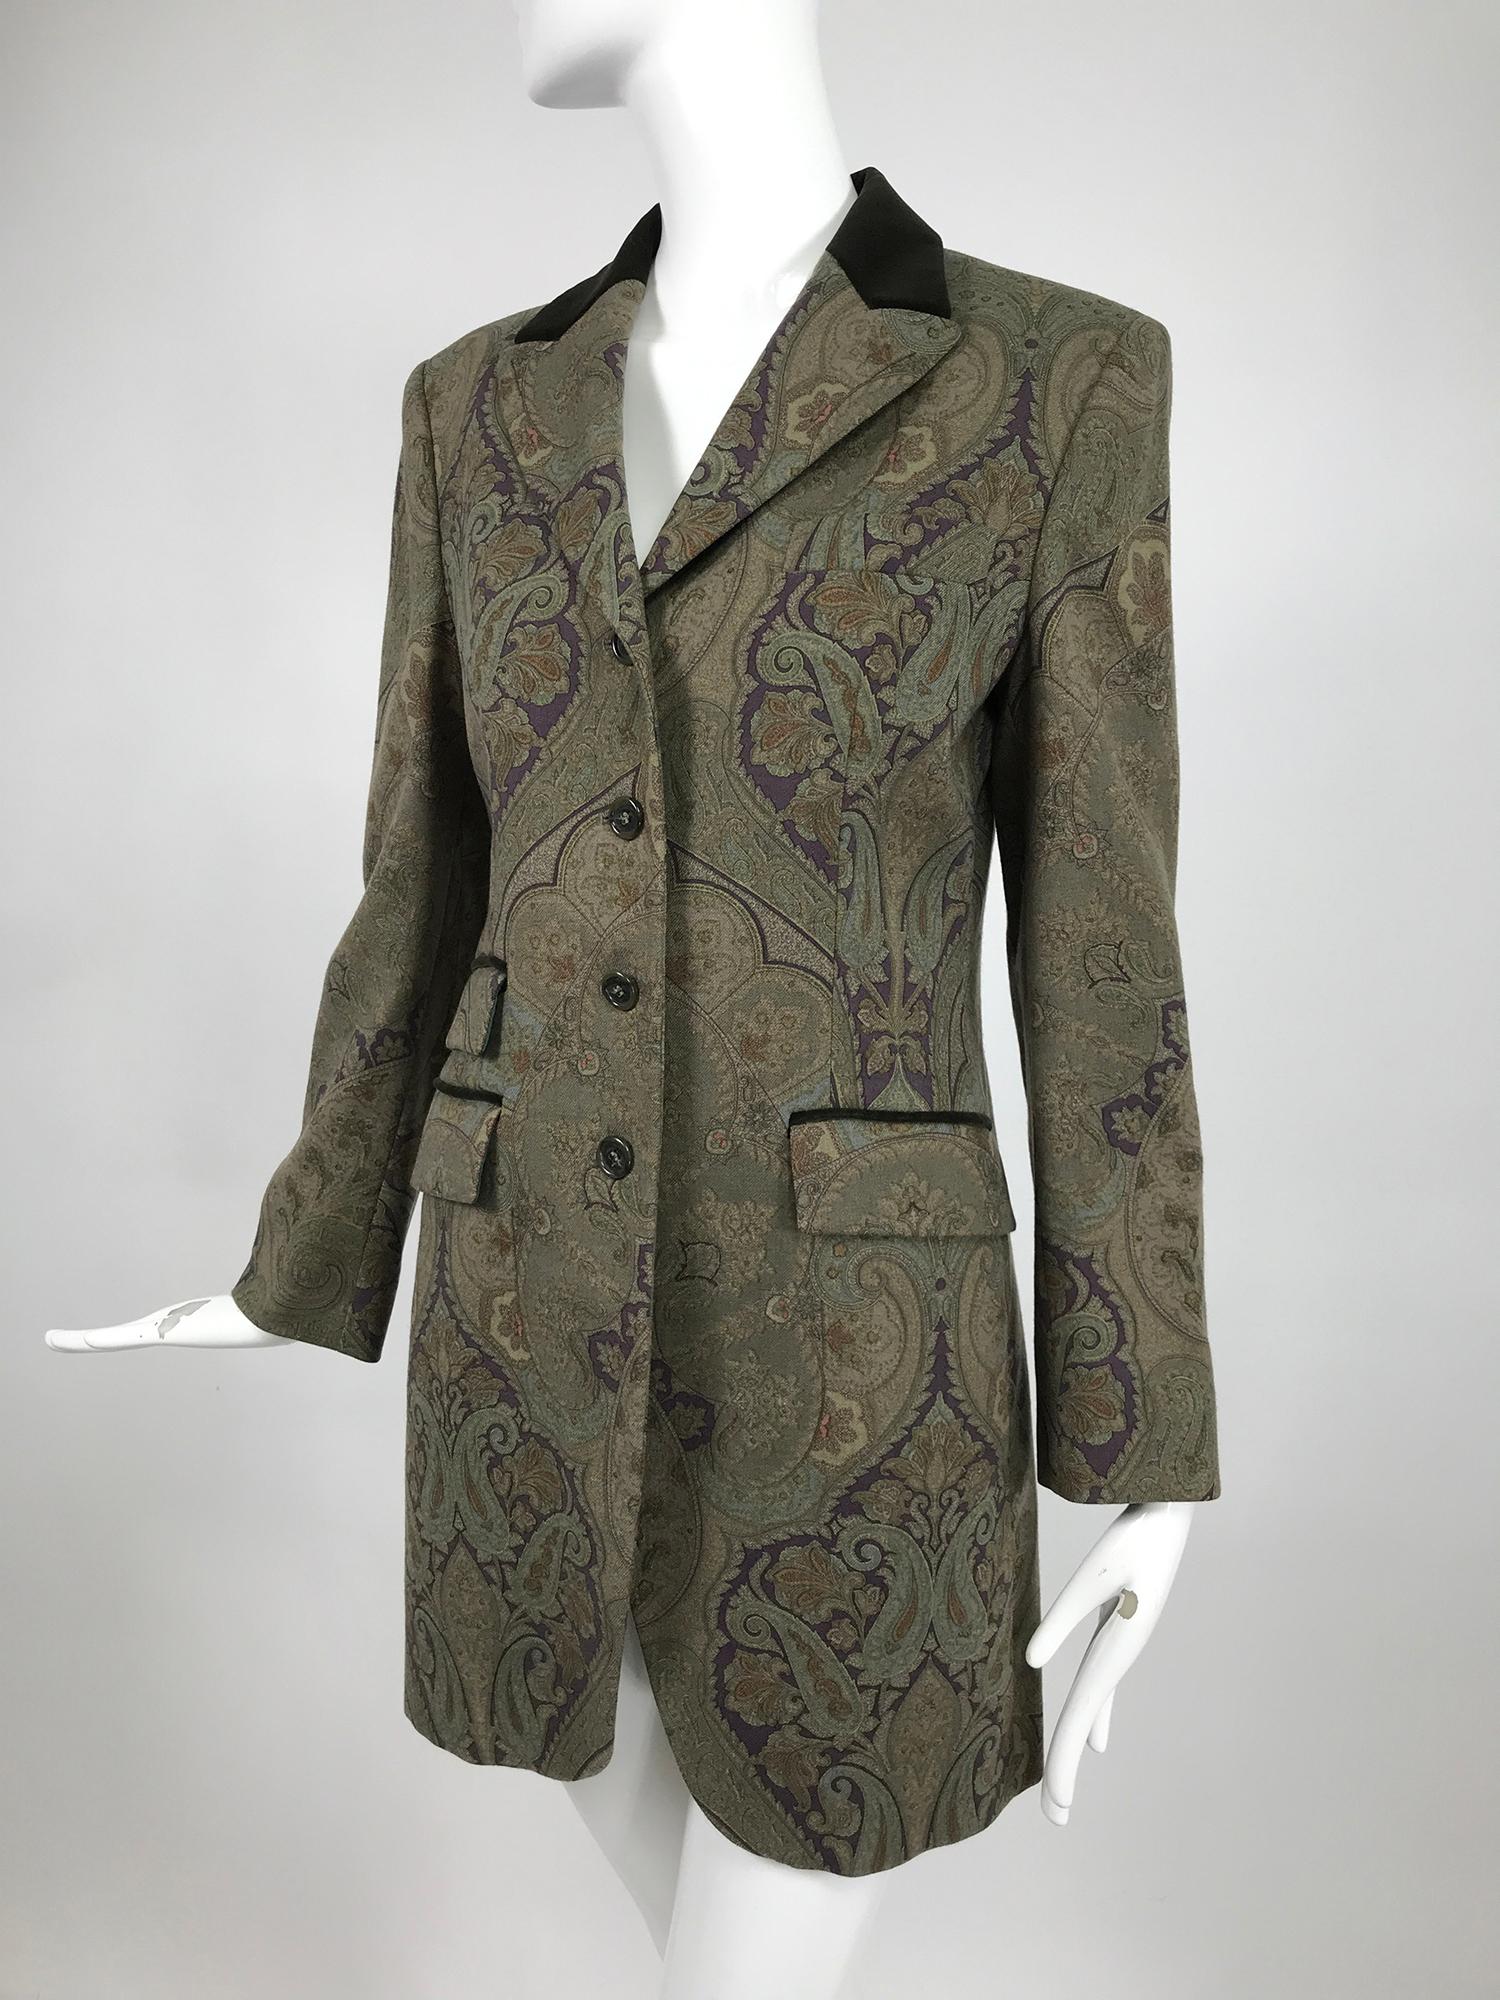 Vintage Etro paisley fine wool riding jacket from the 1990s. Etro, the company that was built on the paisley and is known for beautiful design with a bohemian flair. This gorgeous jacket is perfect for any occasion from casual dressy. The design in